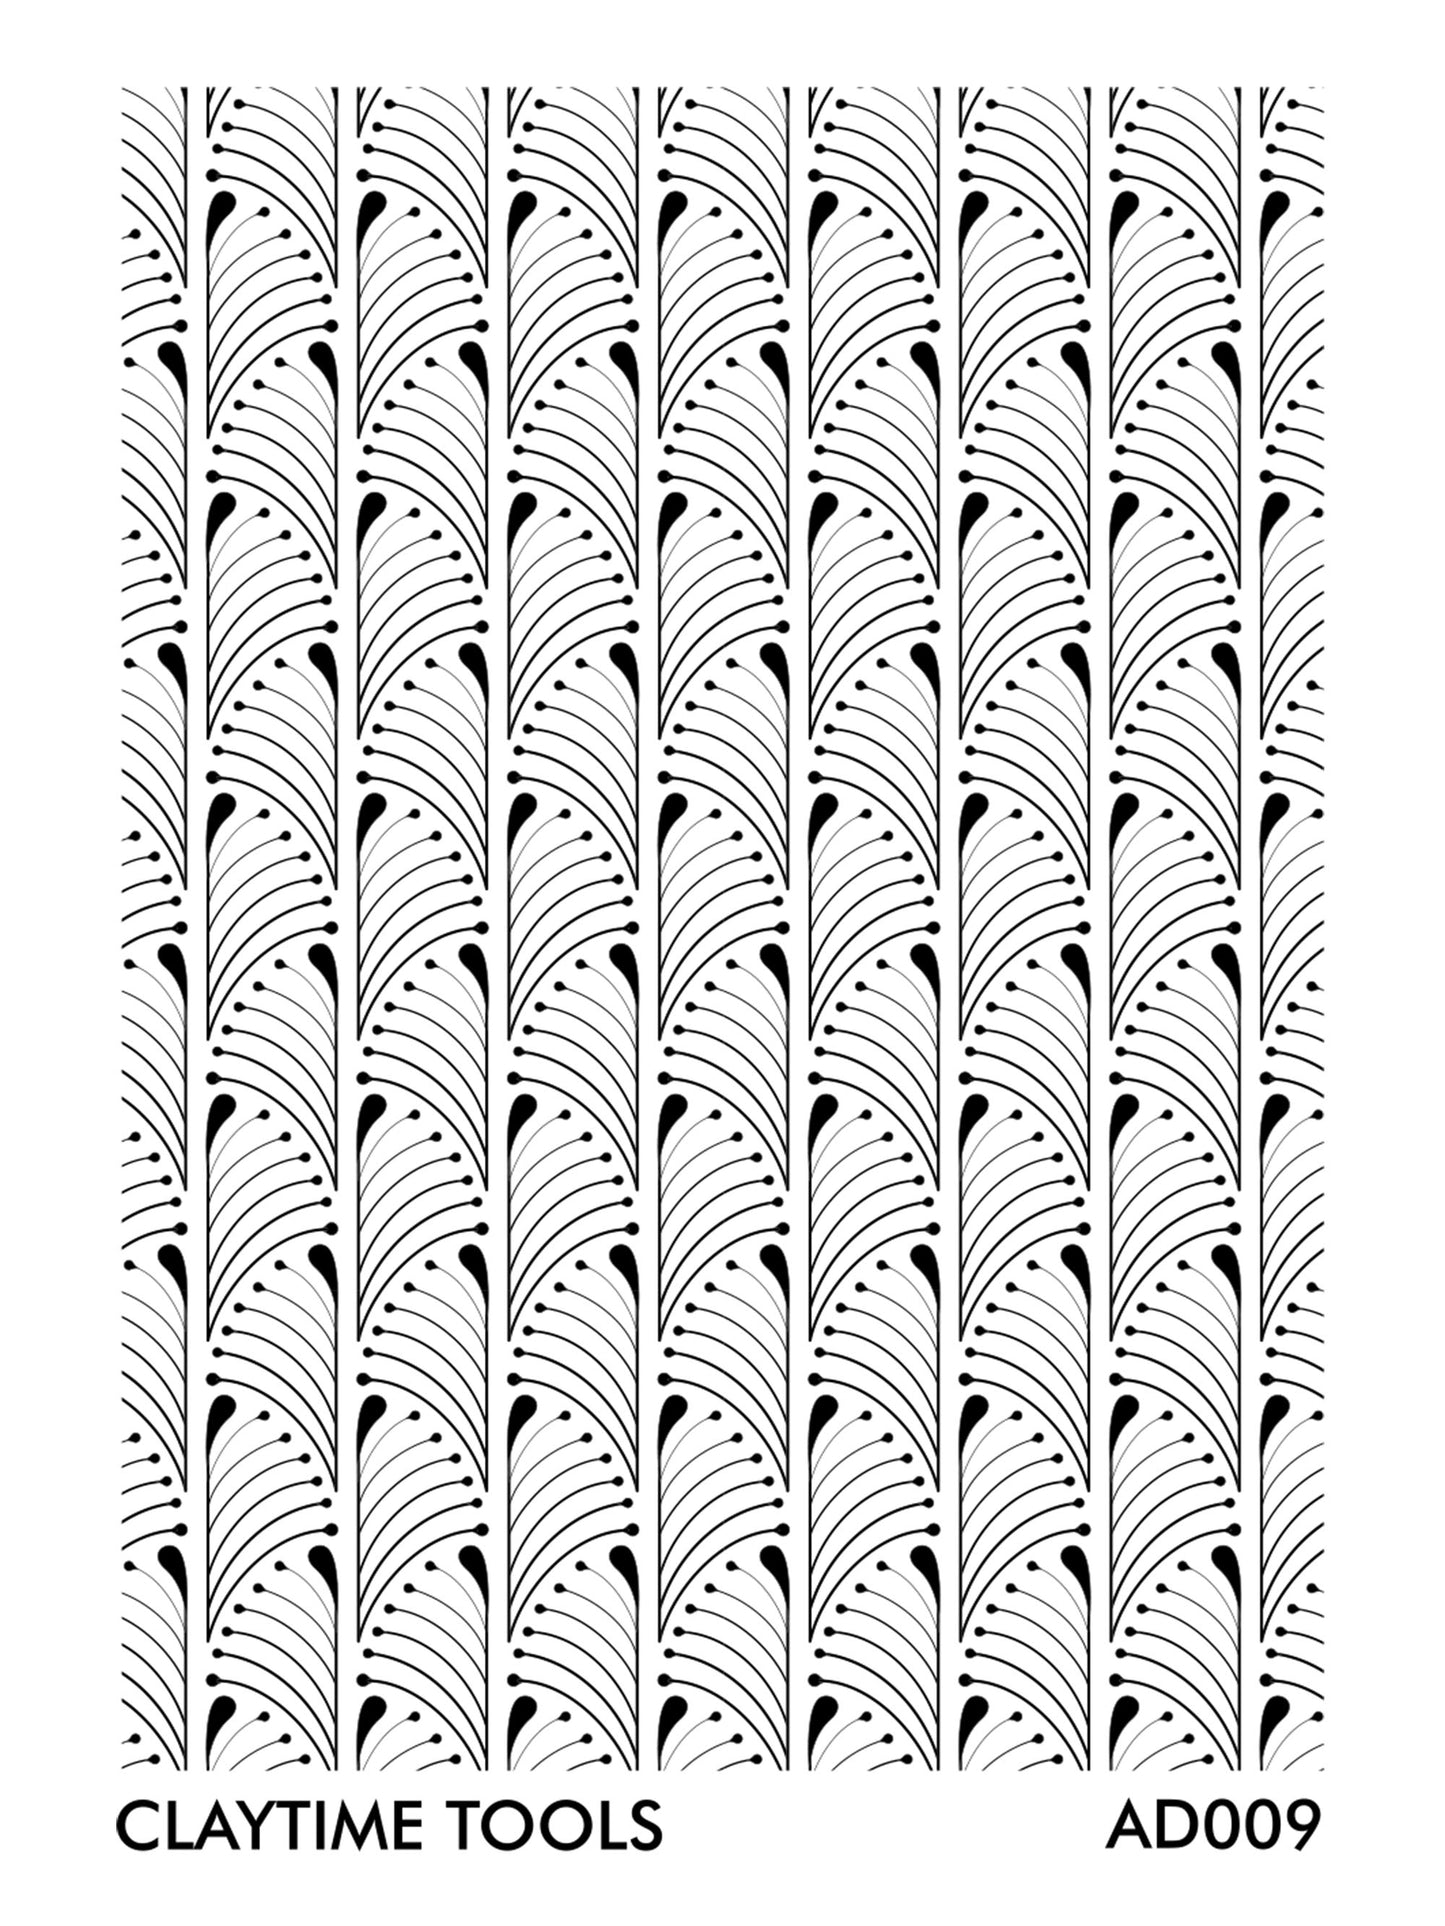 Art deco feathers motif in a white background.